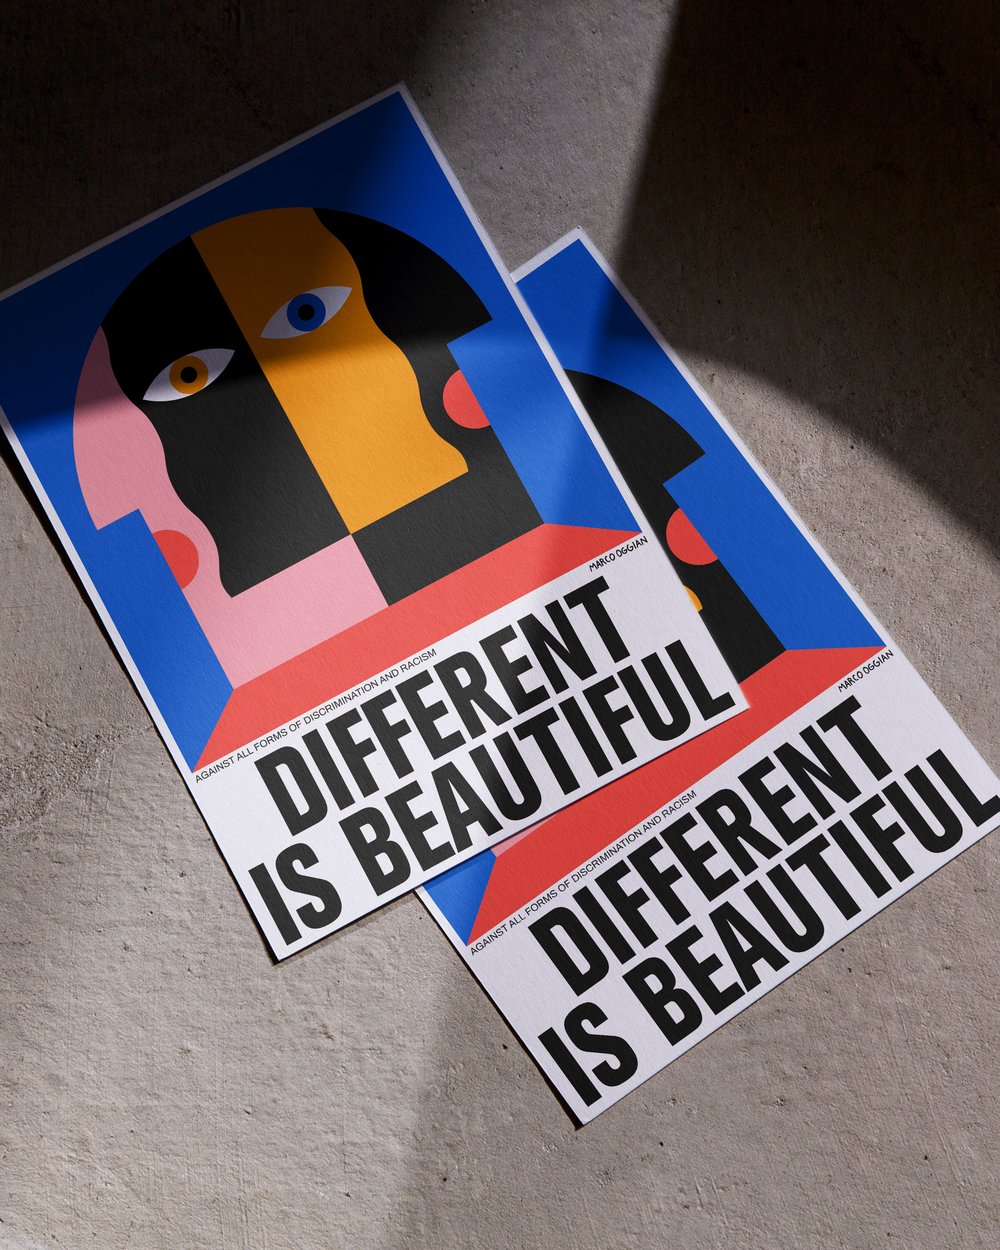 DIFFERENT IS BEAUTIFUL Poster by Marco Oggian